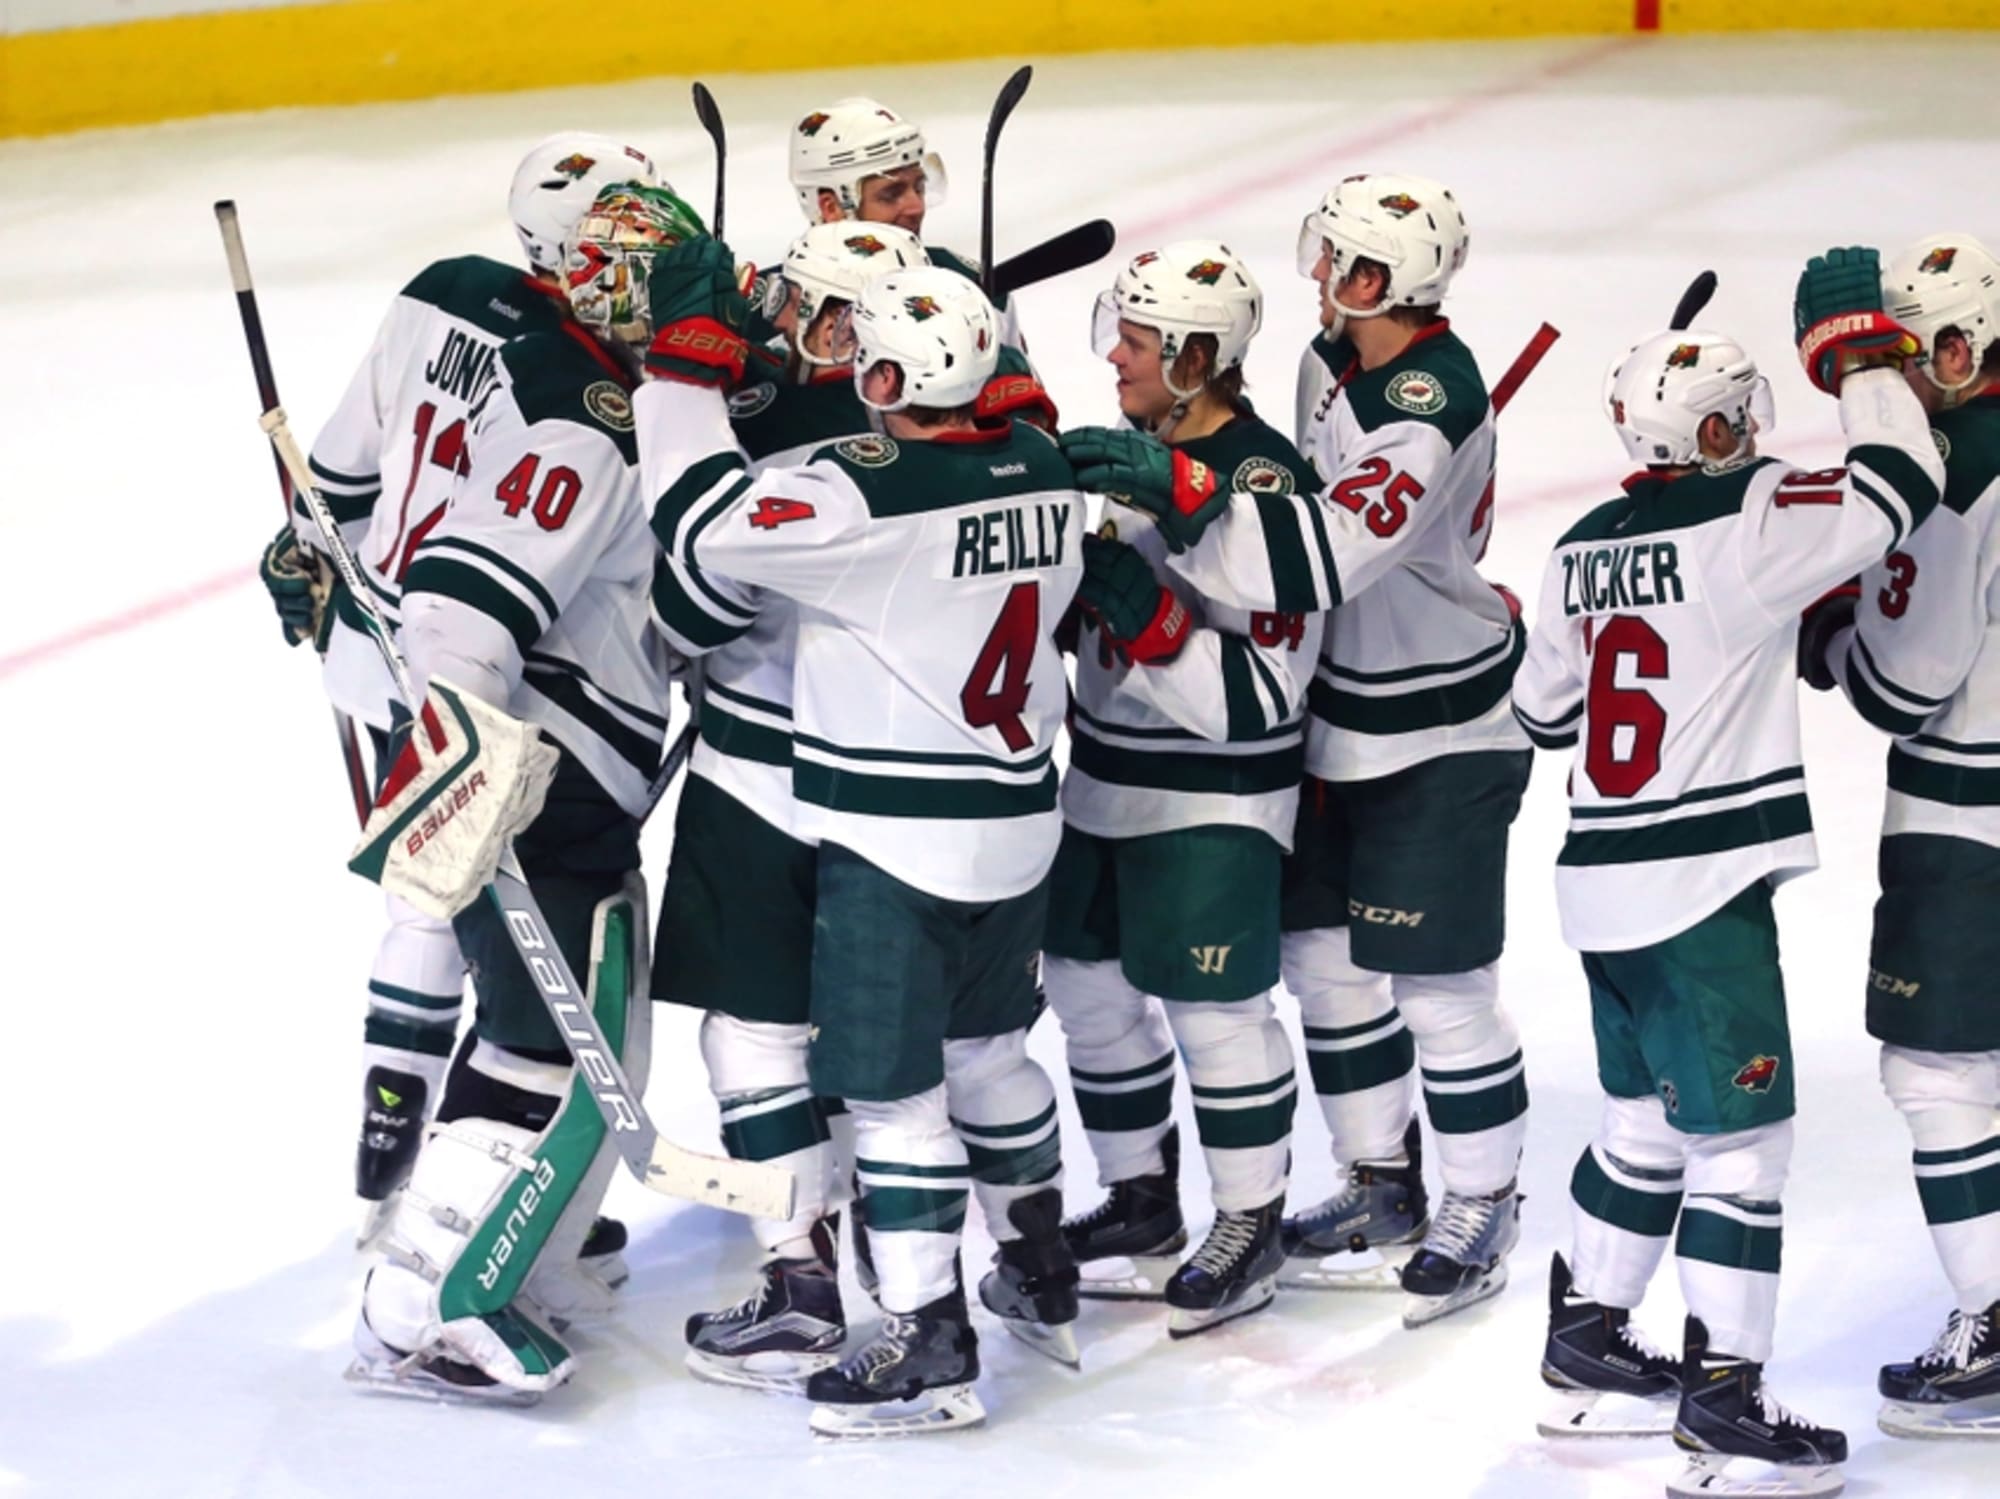 Minnesota Wild: Take a Lesson from The North Stars - rta.com.co